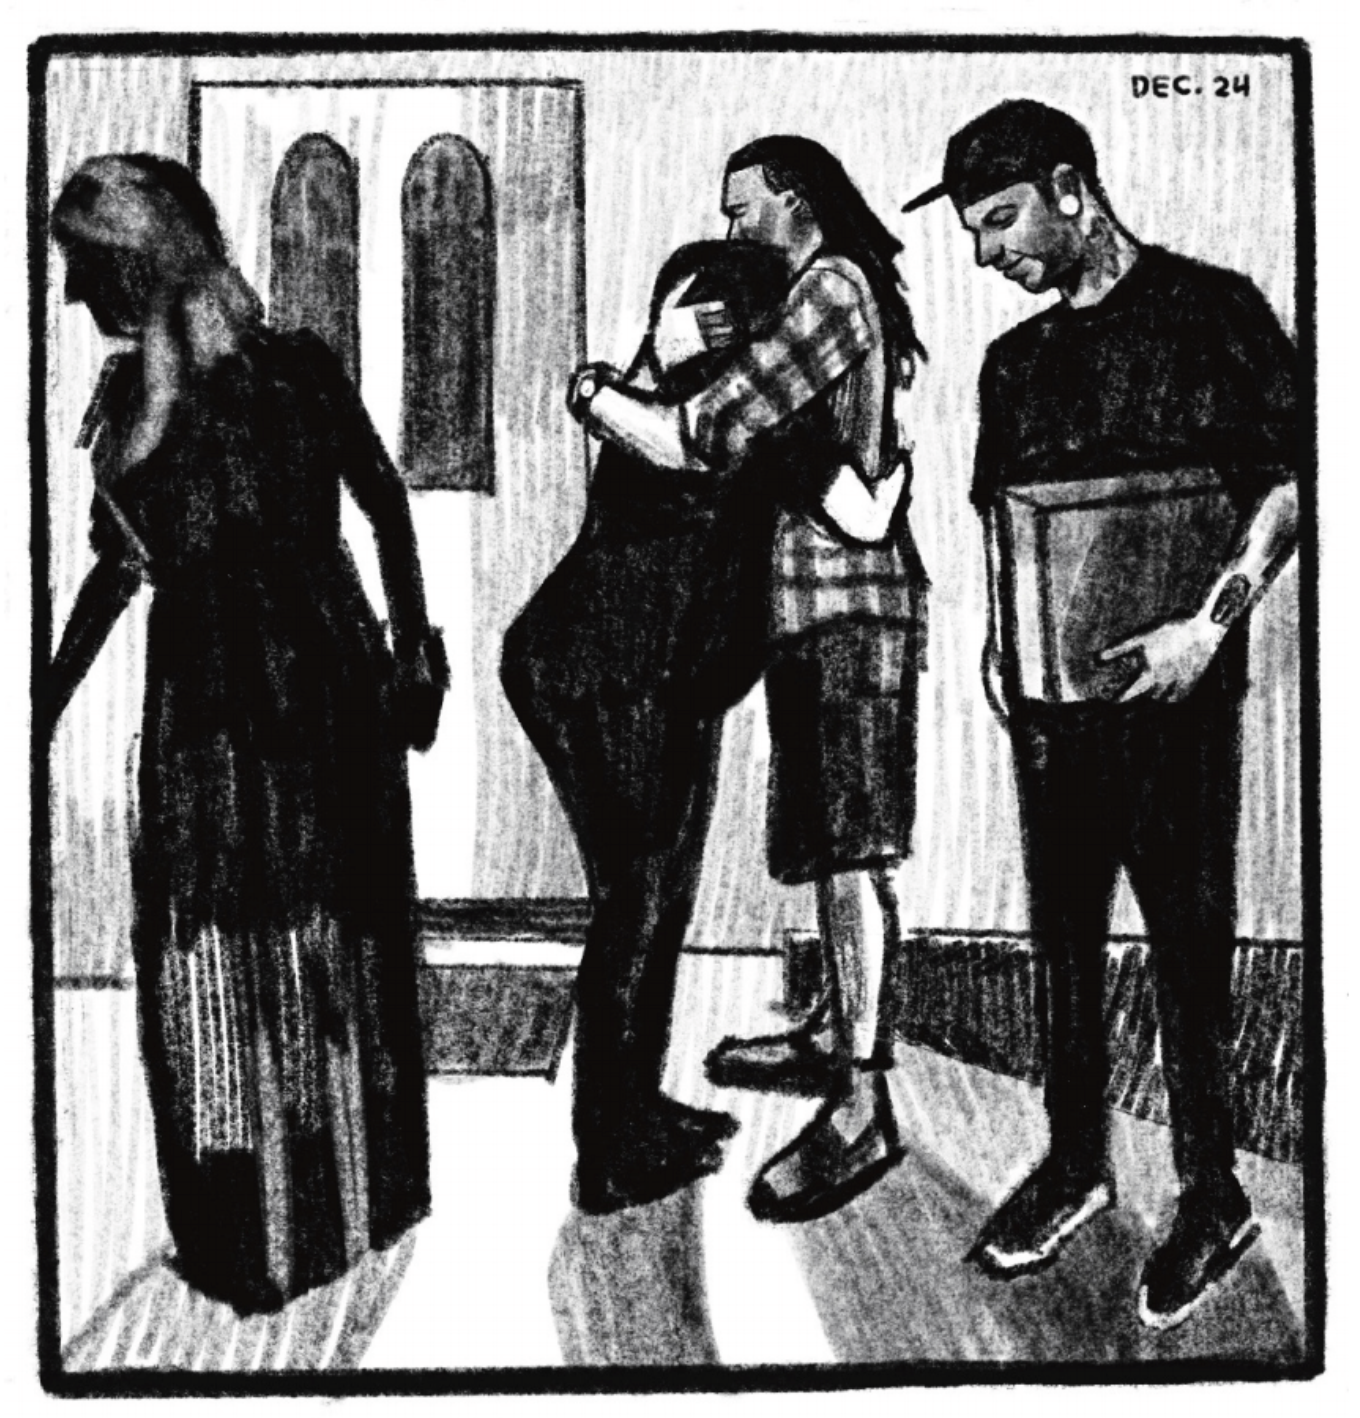 Four people stand by the entryway of a house; one of them, silhouetted, looks like Kimâ€™s mom. Two embrace by the door; another stands nearby holding a package. â€œDecember 24.â€